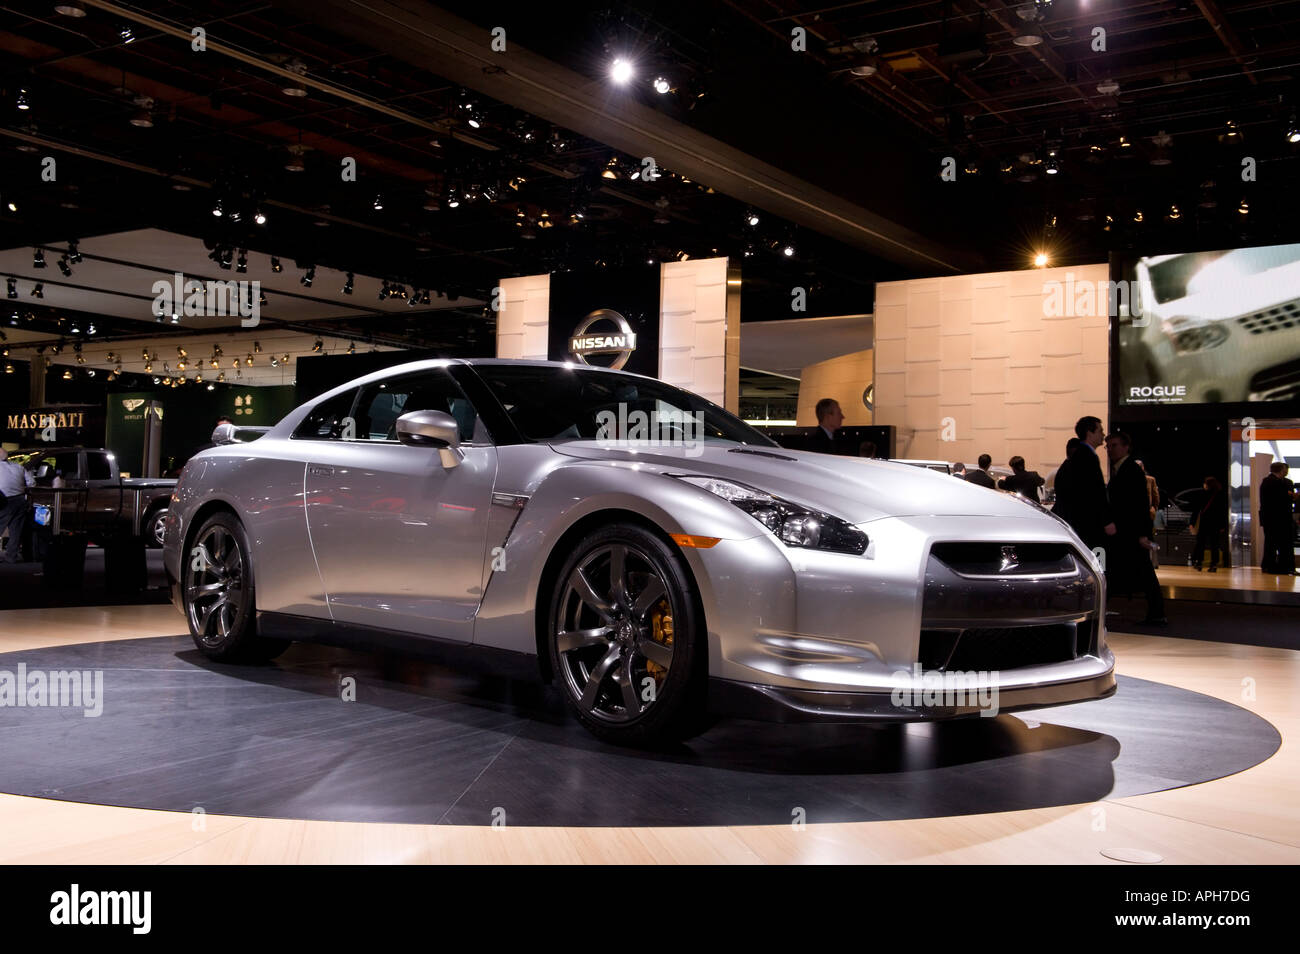 Nissan GT-R at the 2008 North American International Auto Show in Detroit Michigan USA Stock Photo